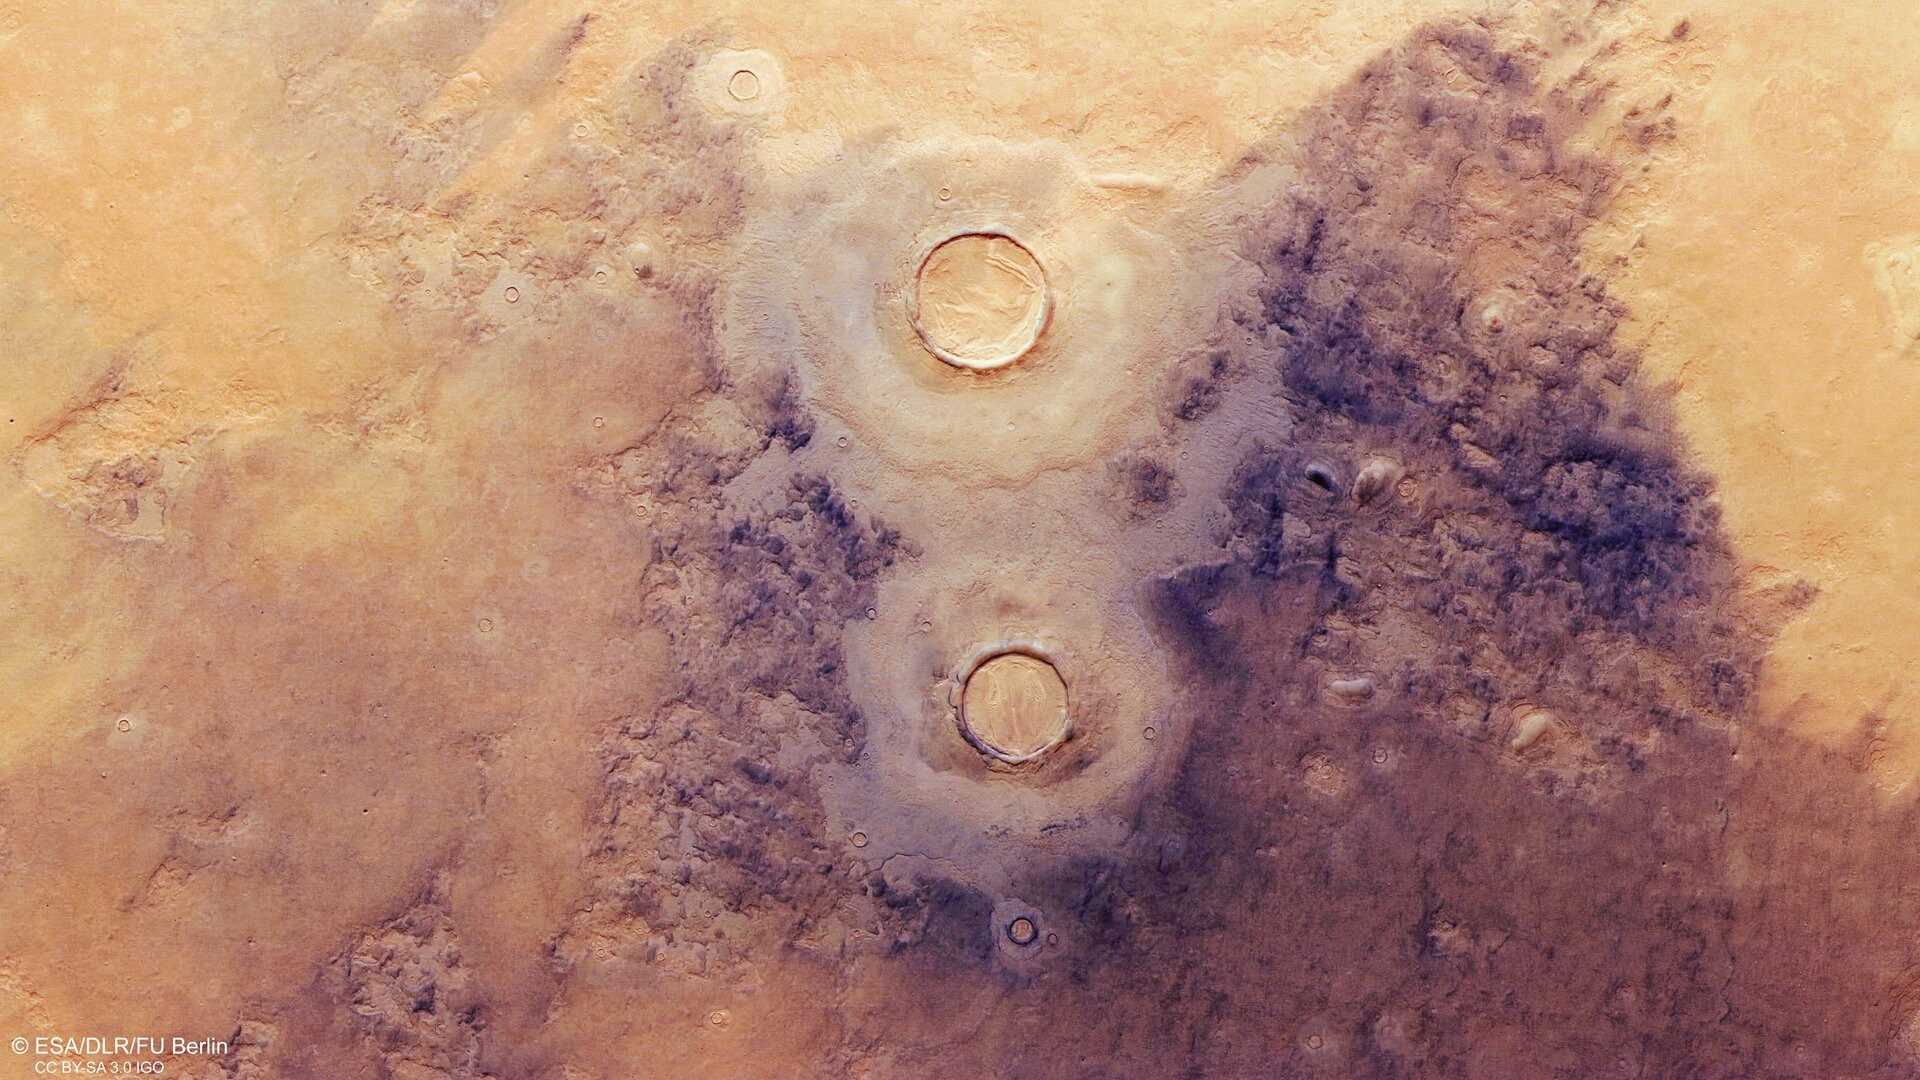 An overhead view of Utopia Planitia on Mars based on the European Space Agency's Mars Express data.